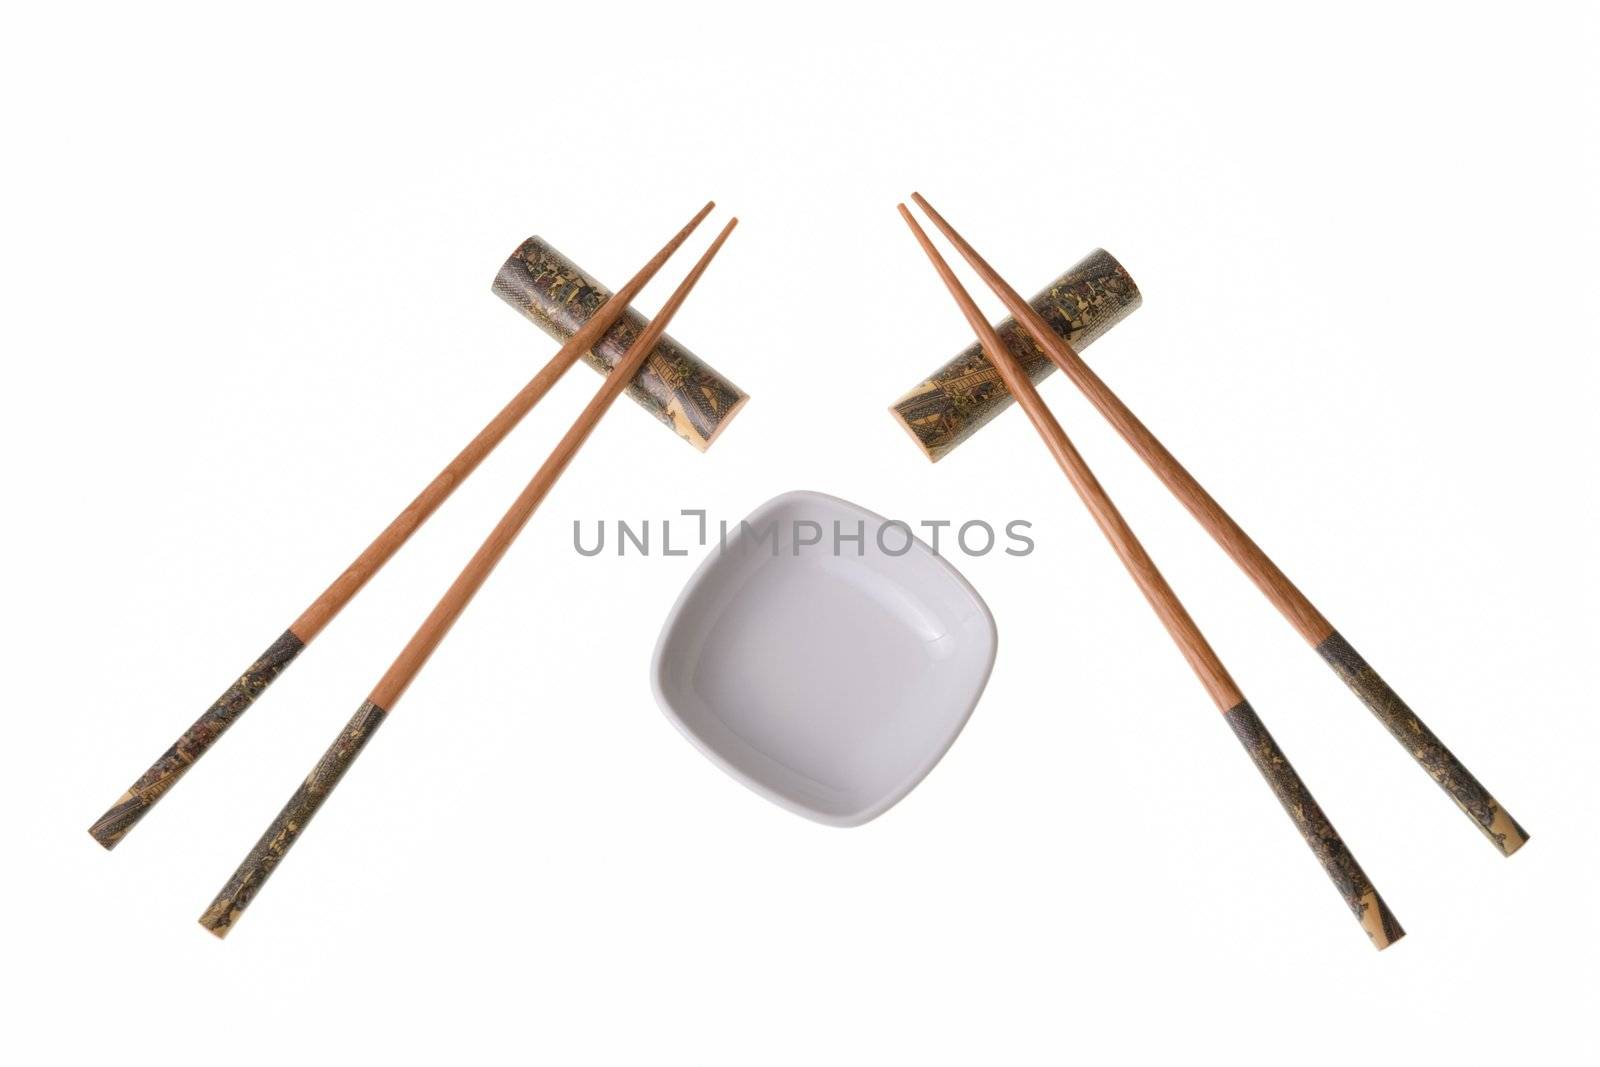 Two pairs of wooden chopsticks and white empty saucer. Sticks are decorated with temple theme ornamentation. Isolated on white